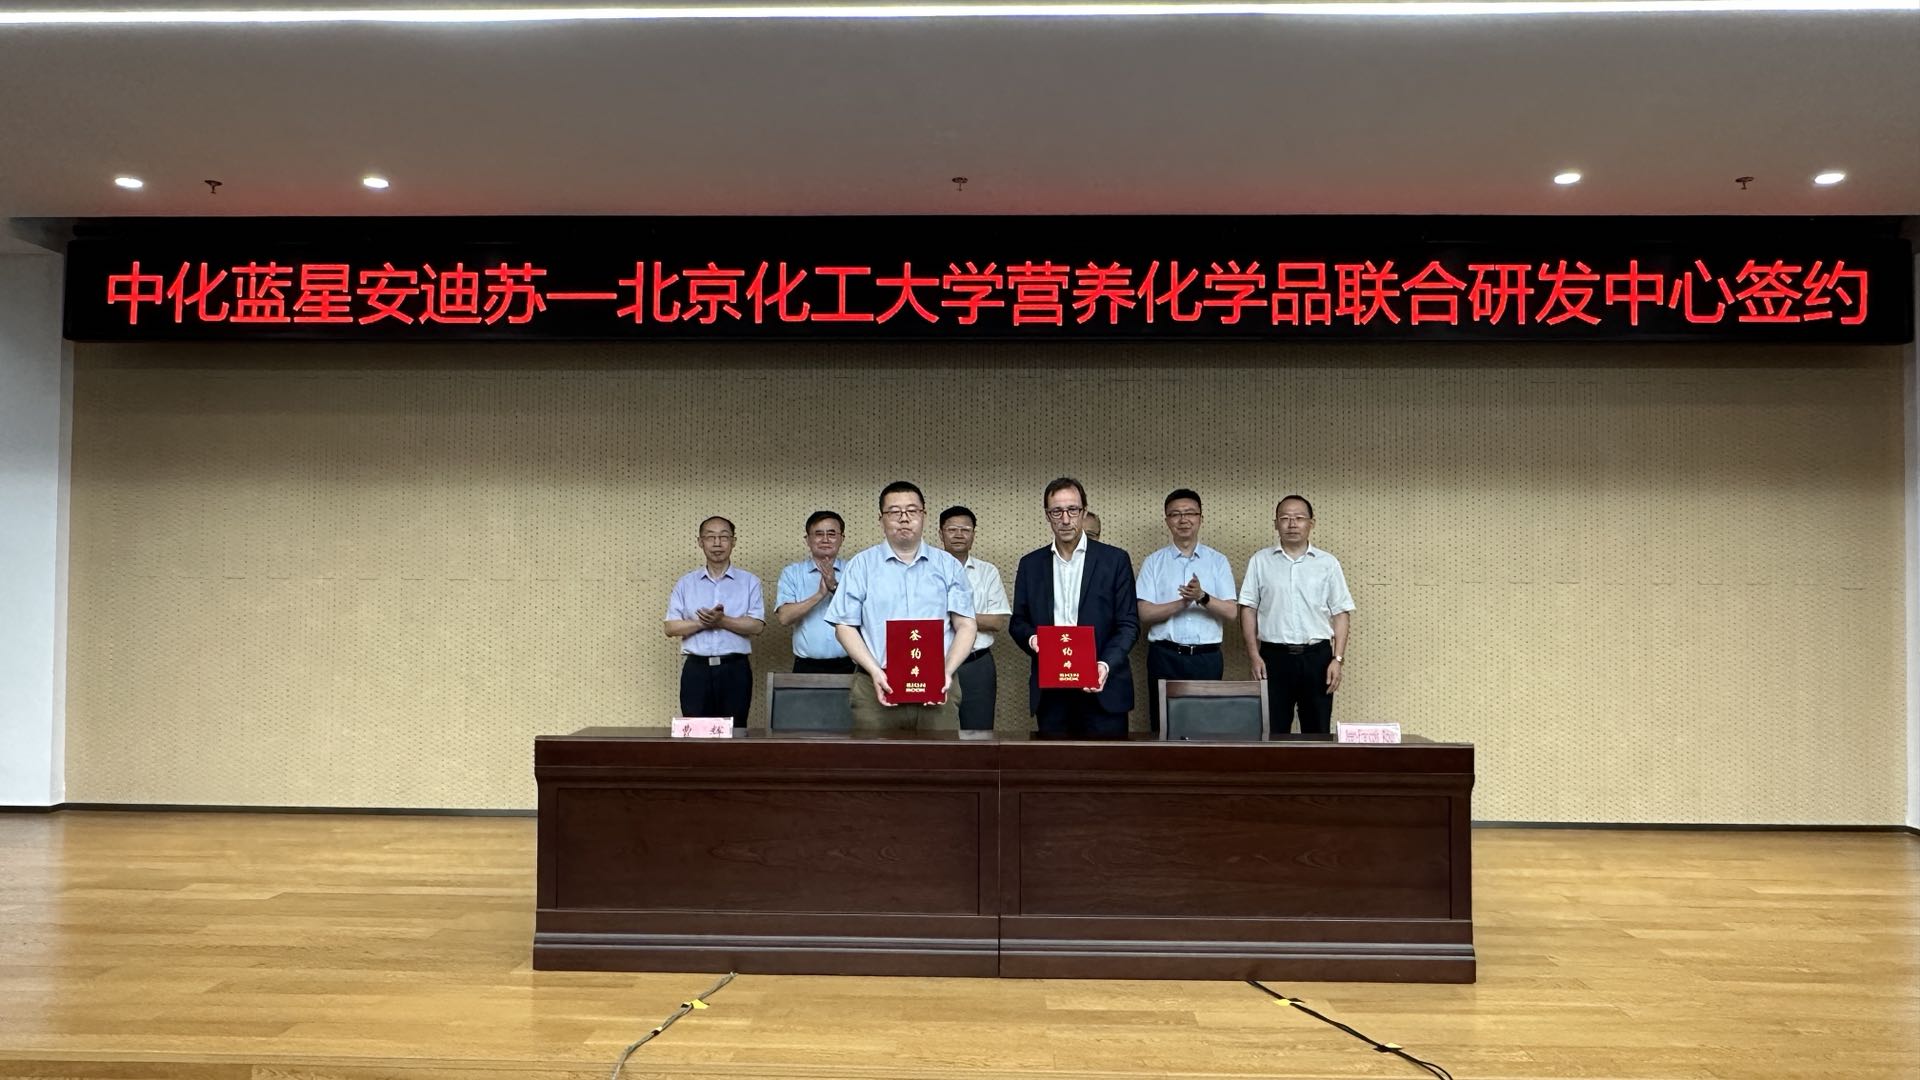 Adisseo and Beijing University of Chemical Technology Cooperate to Establish a Joint R&D Center for Nutritional Chemicals 